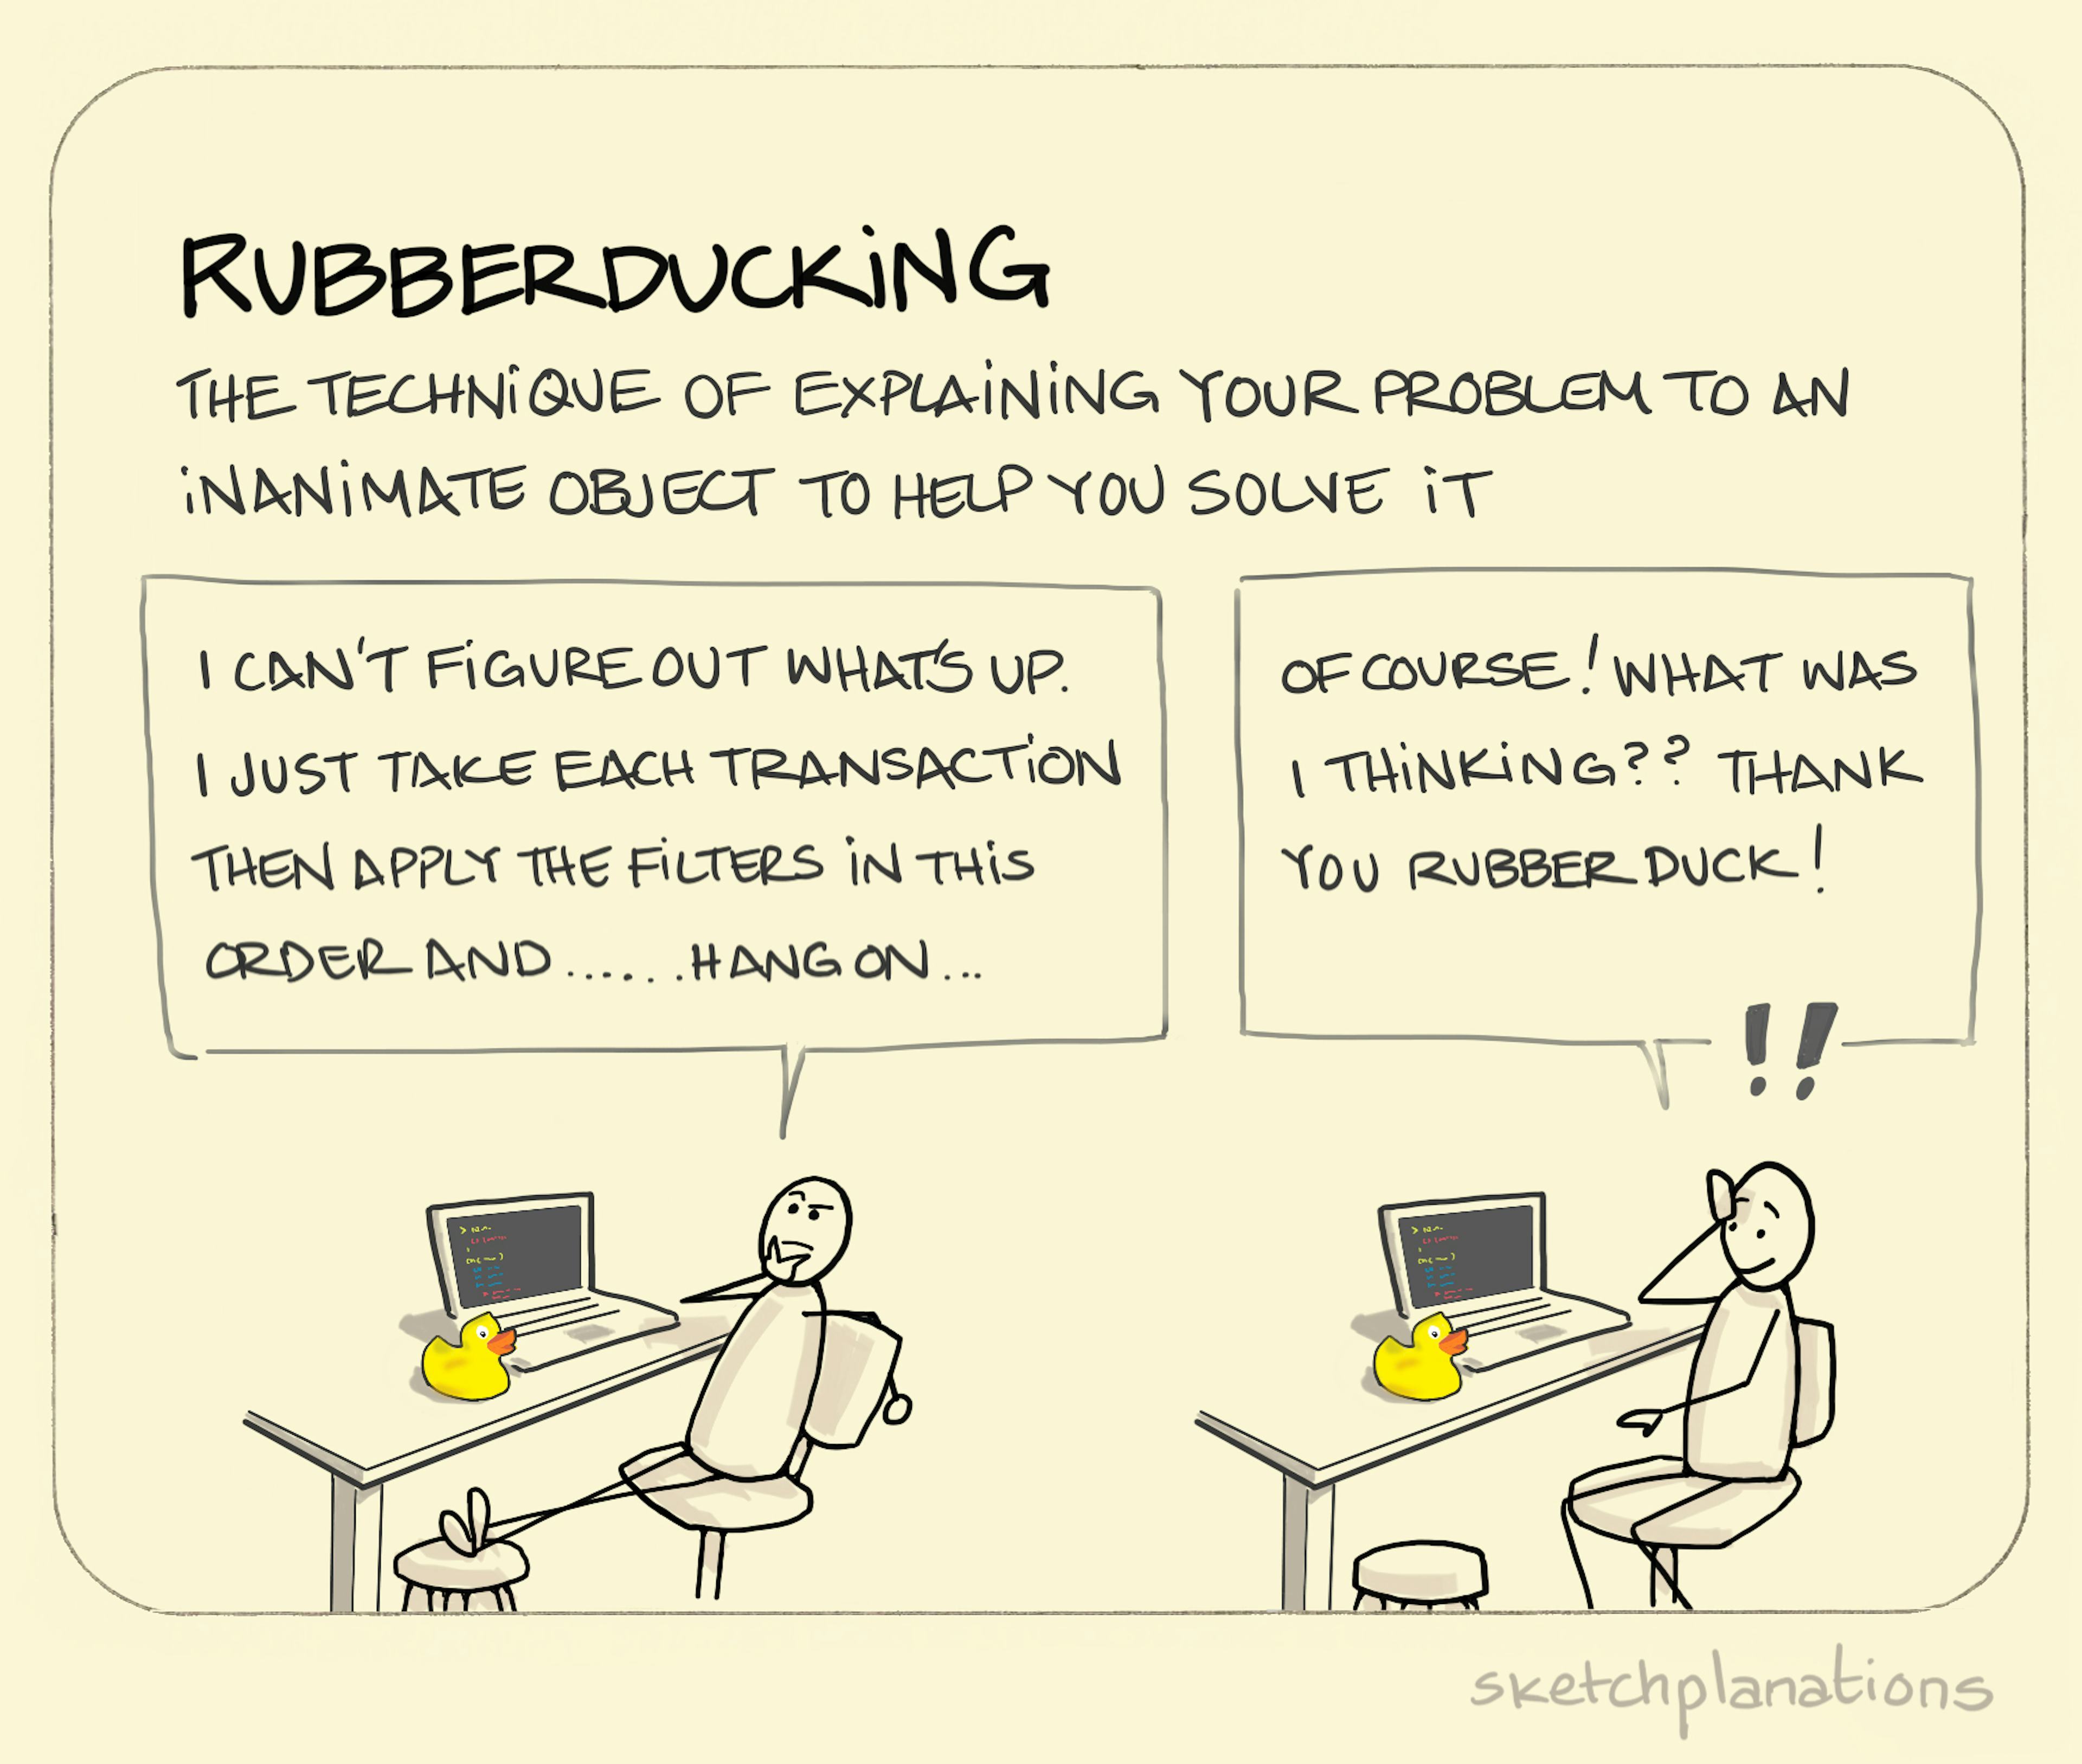 Rubberducking: a developer talks their problem through with the therapist duck on the table only to reveal the insight they need. Often useful for debugging.